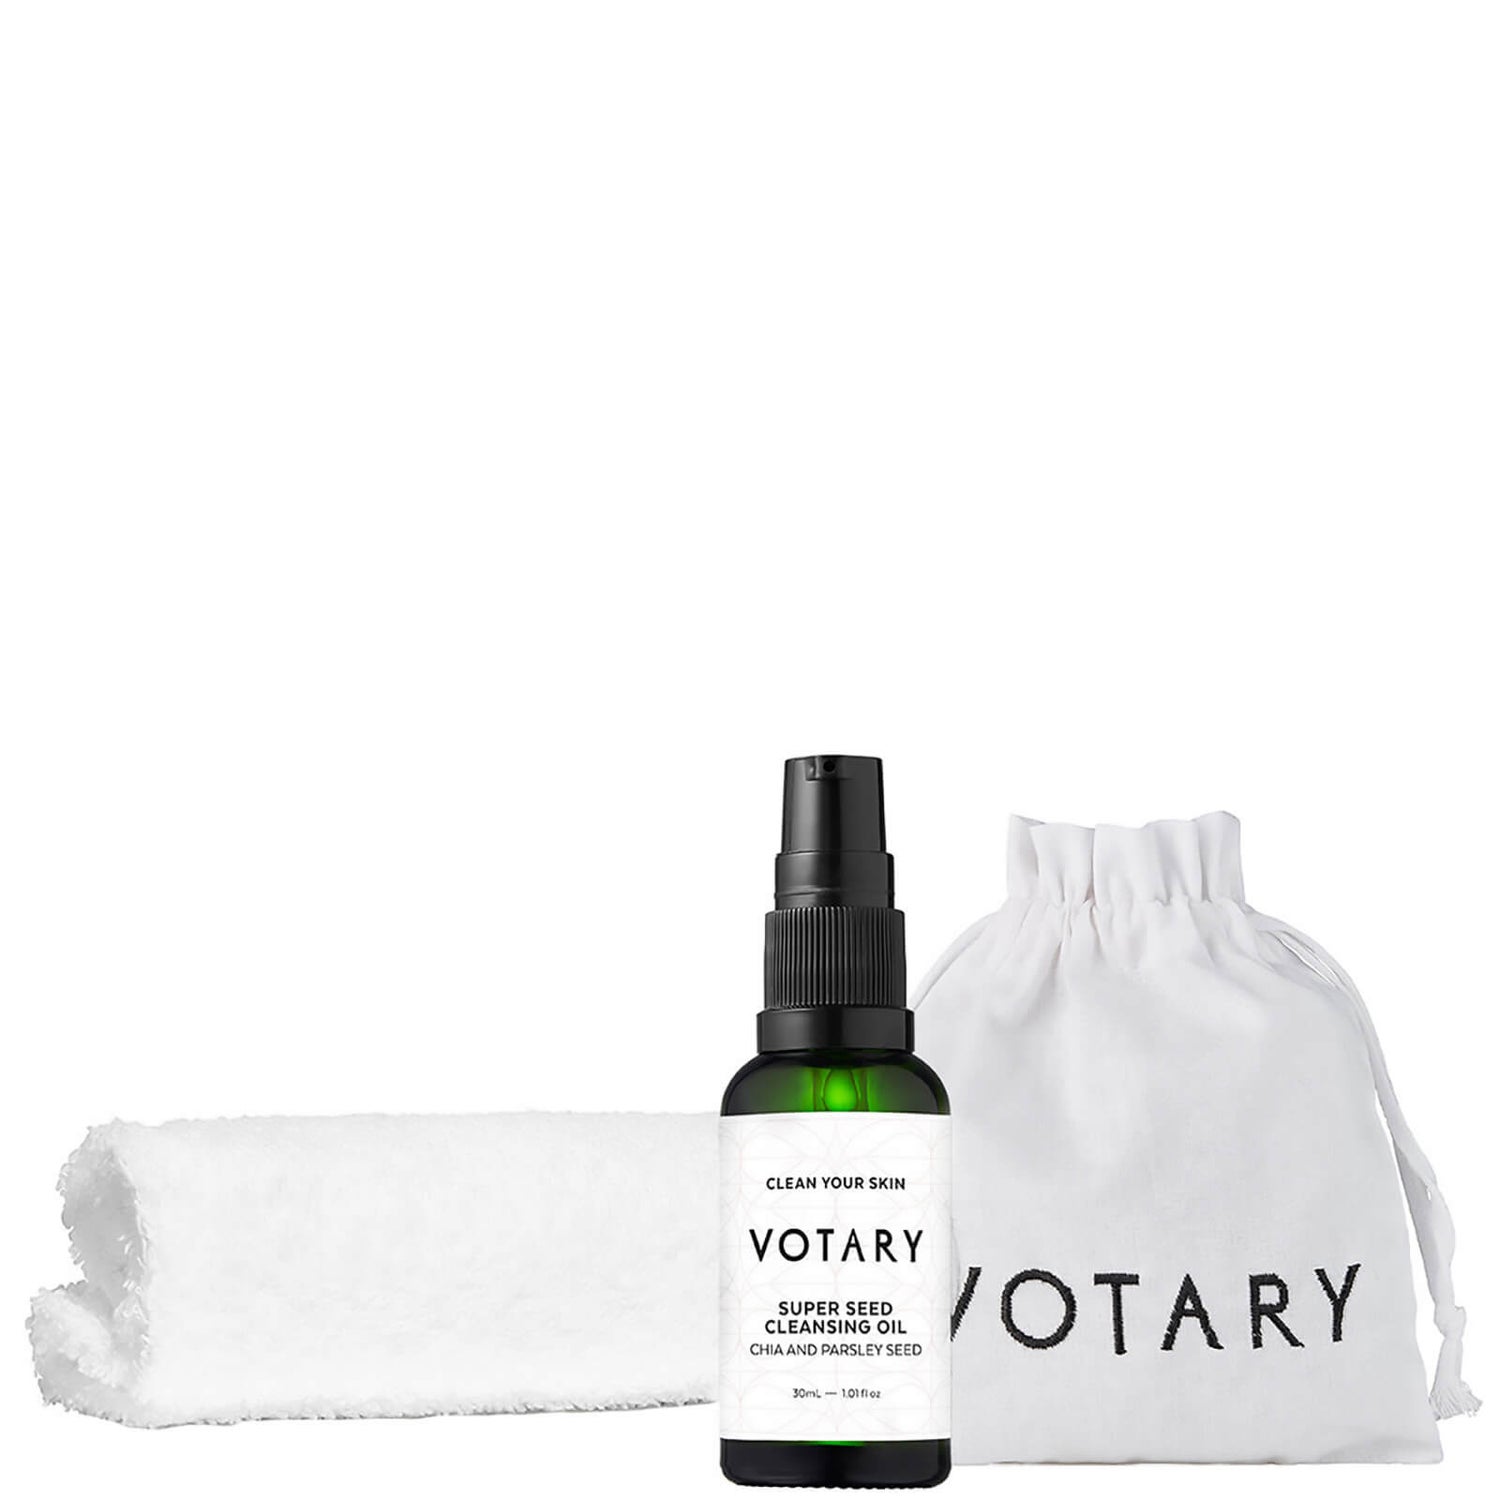 VOTARY Super Seed Cleansing Oil Travel Kit